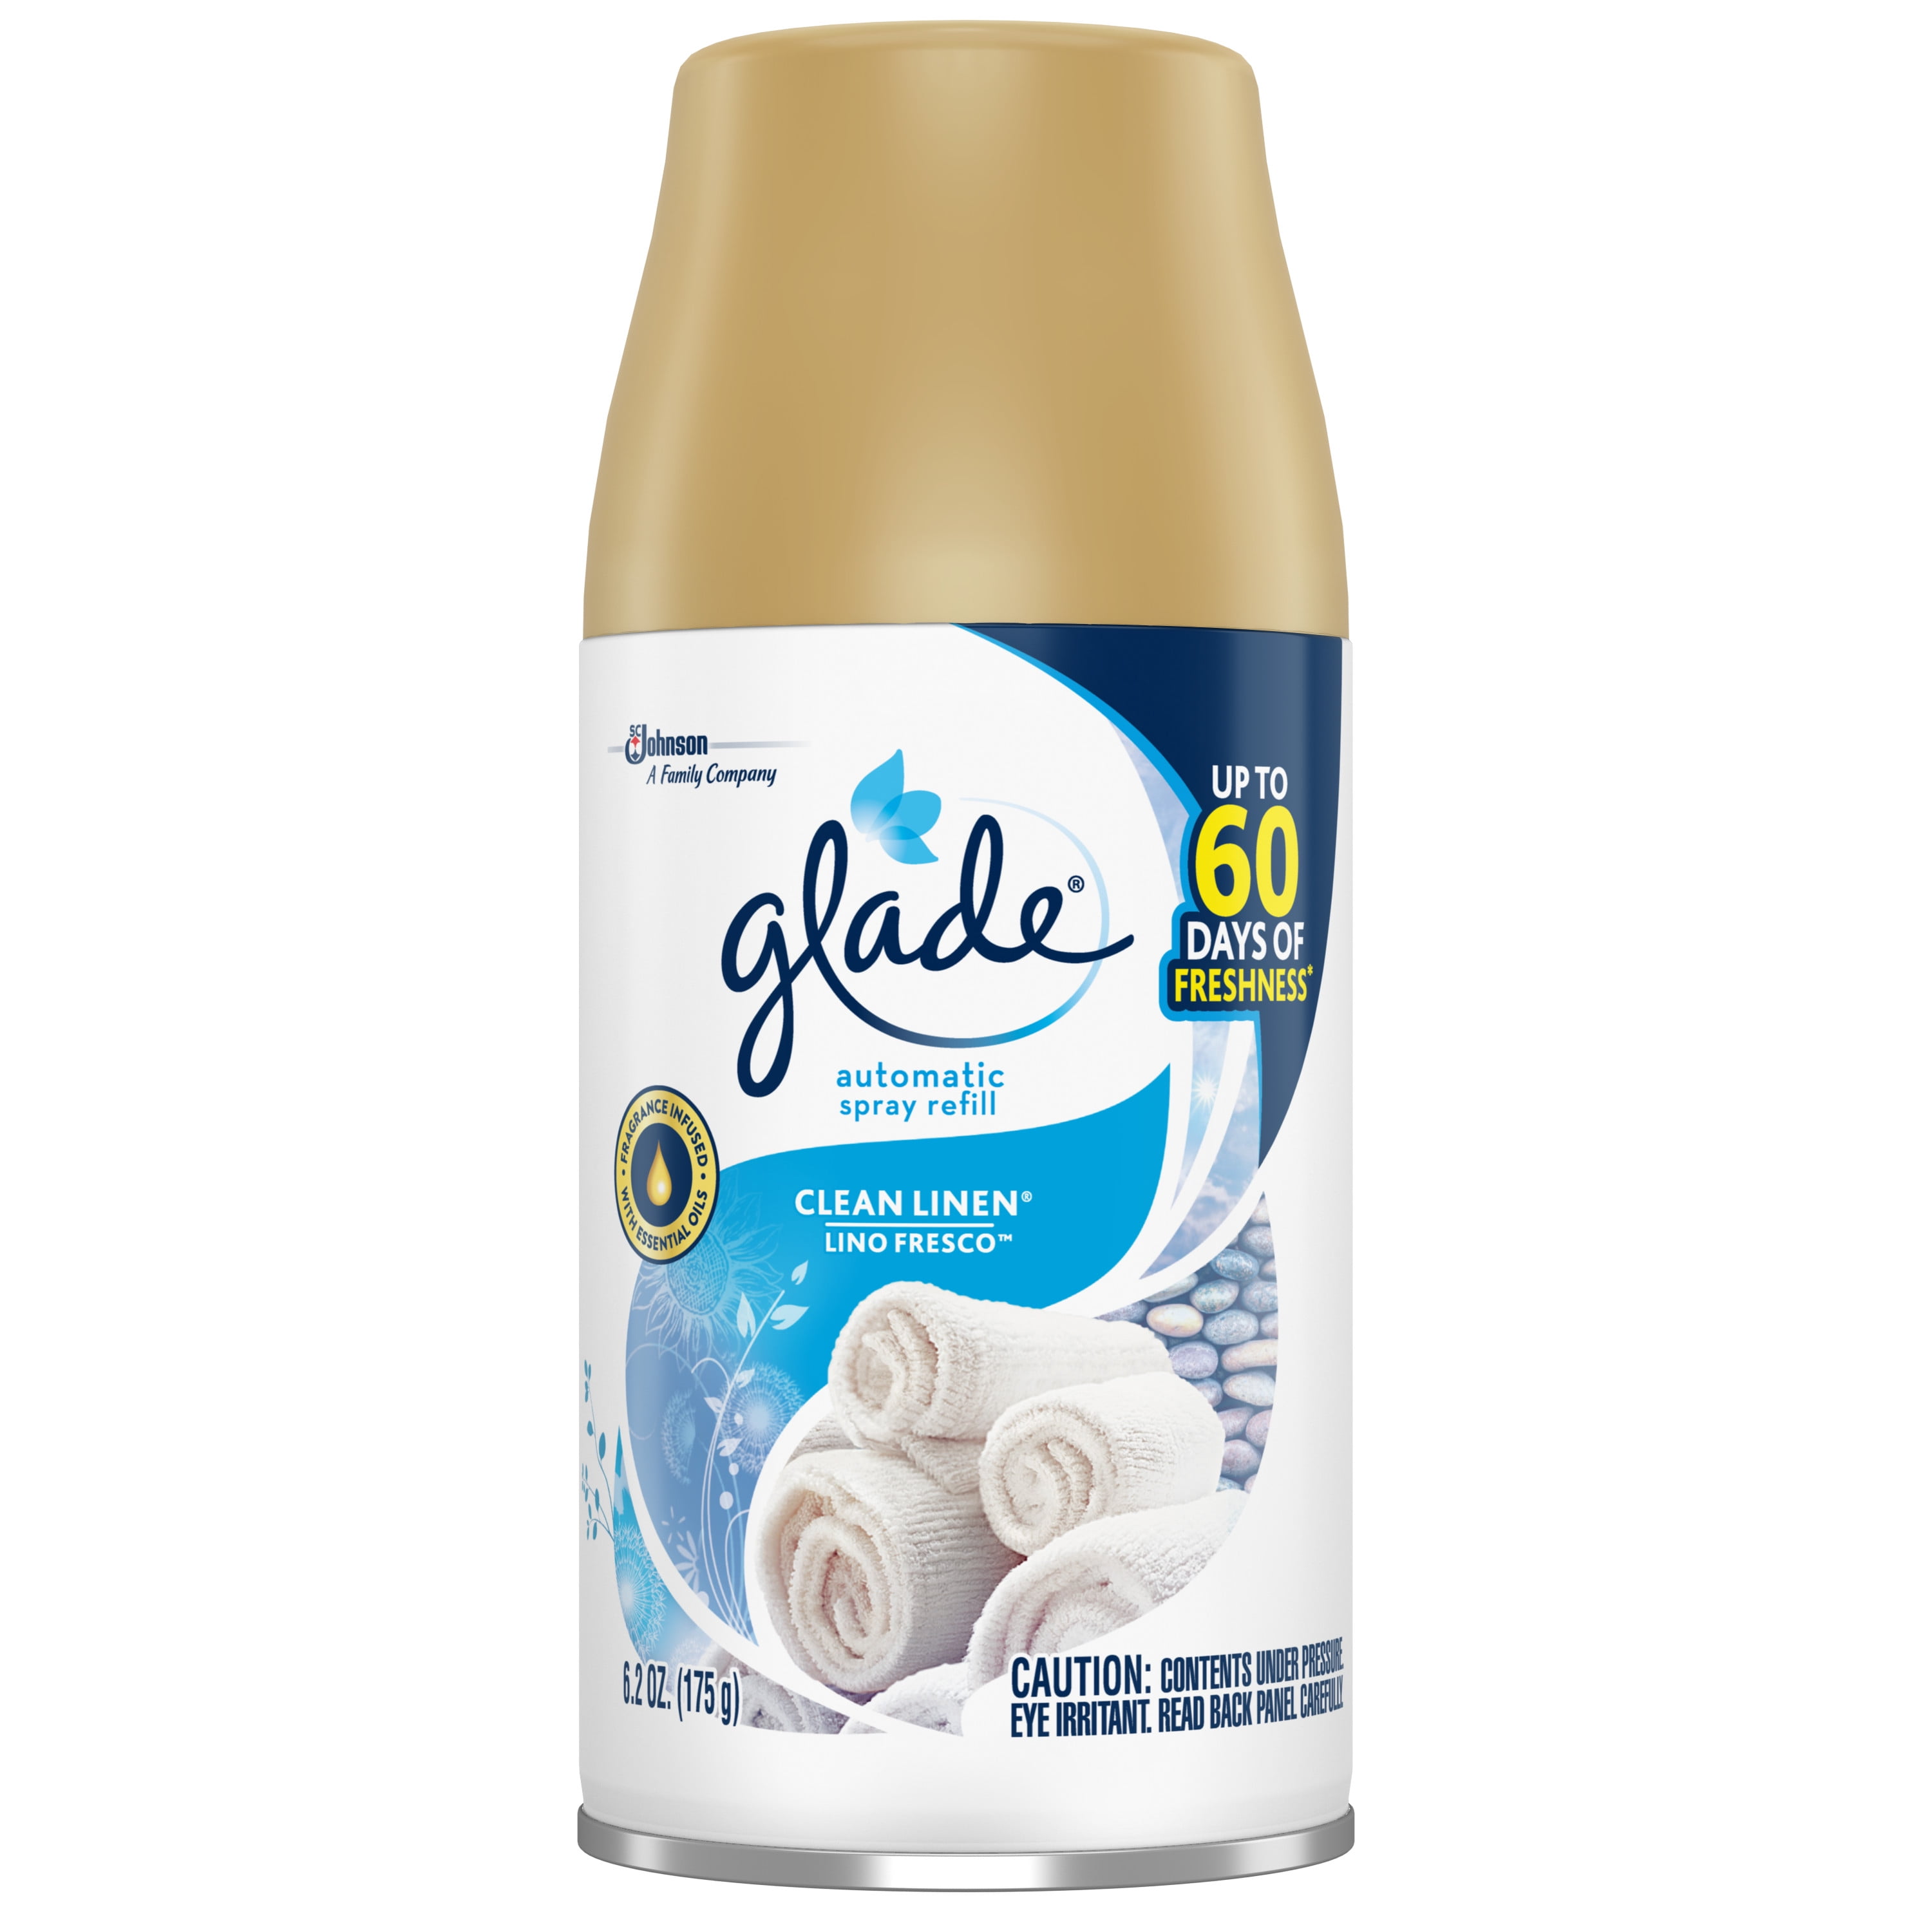 Glade Solid Air Freshener 1 CT, Clean Linen, 6 OZ. Total